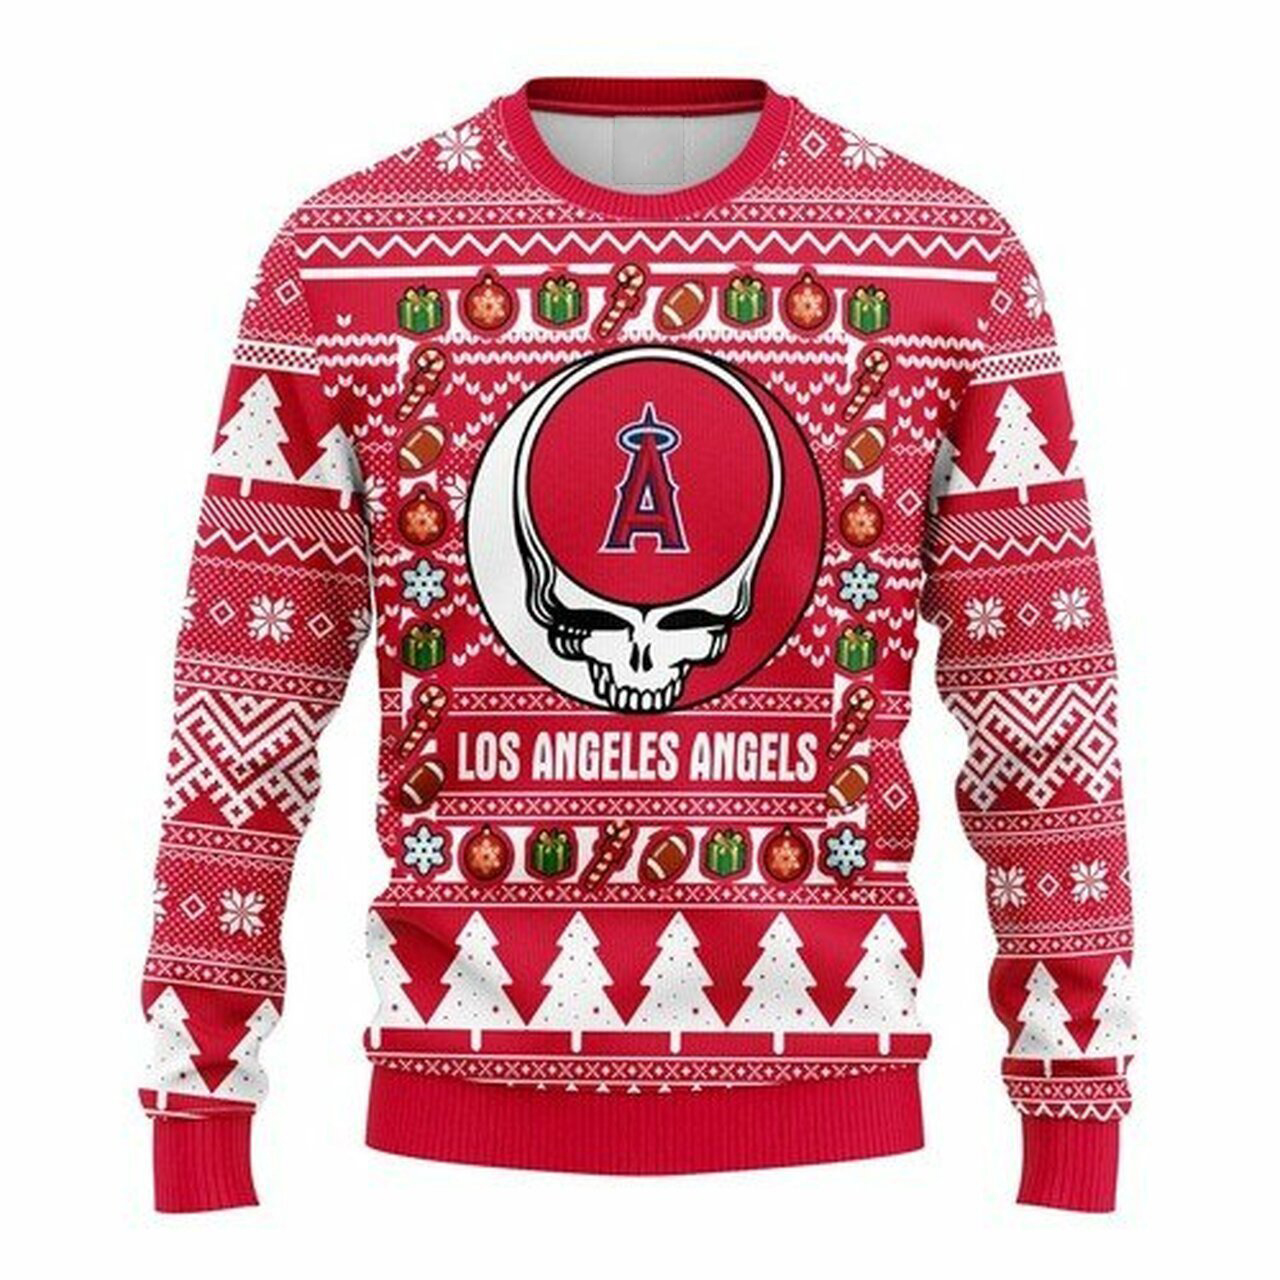 MLB Los Angeles Angels Grateful Dead ugly christmas sweater